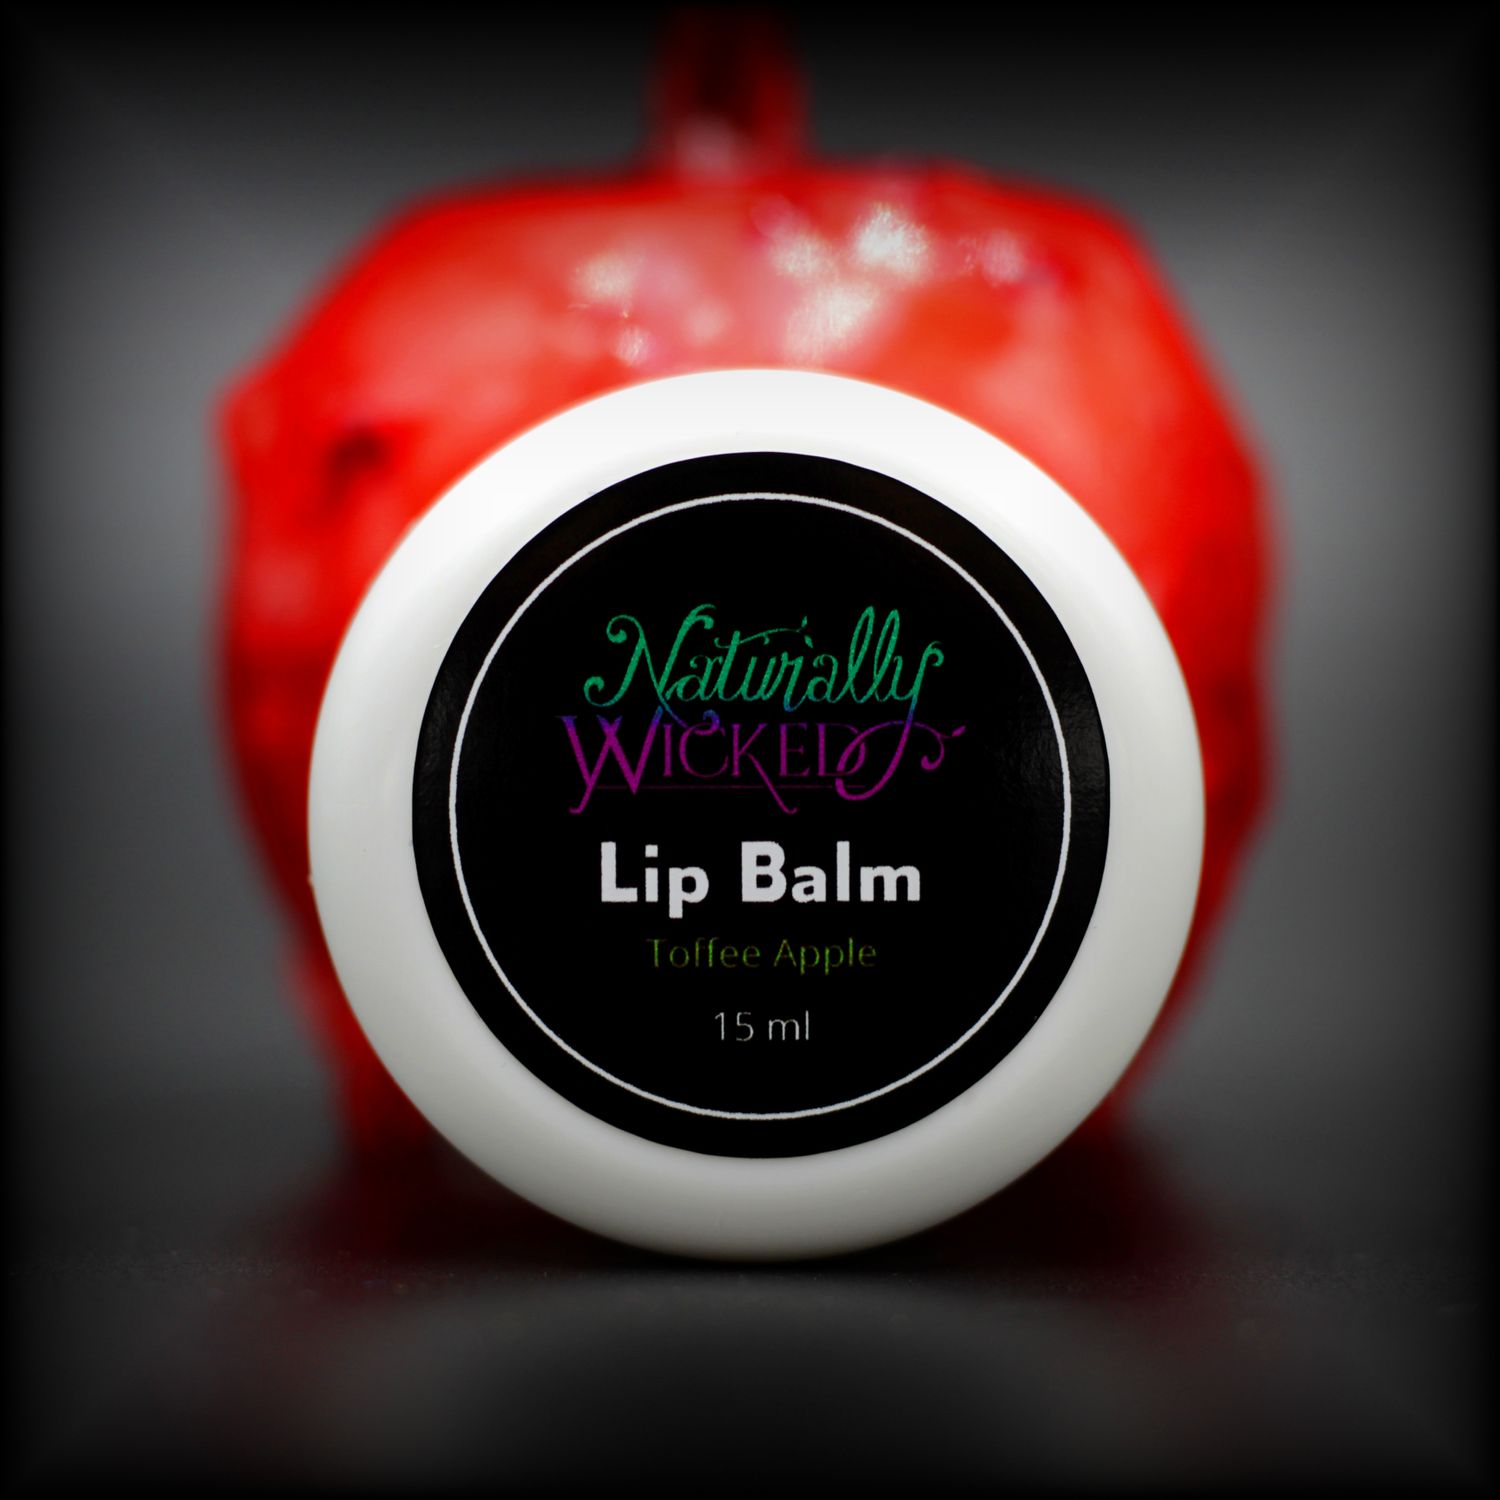 Naturally Wicked Toffee Apple Lip Balm Lid Face In Front Of Bright Red Toffee Apple 